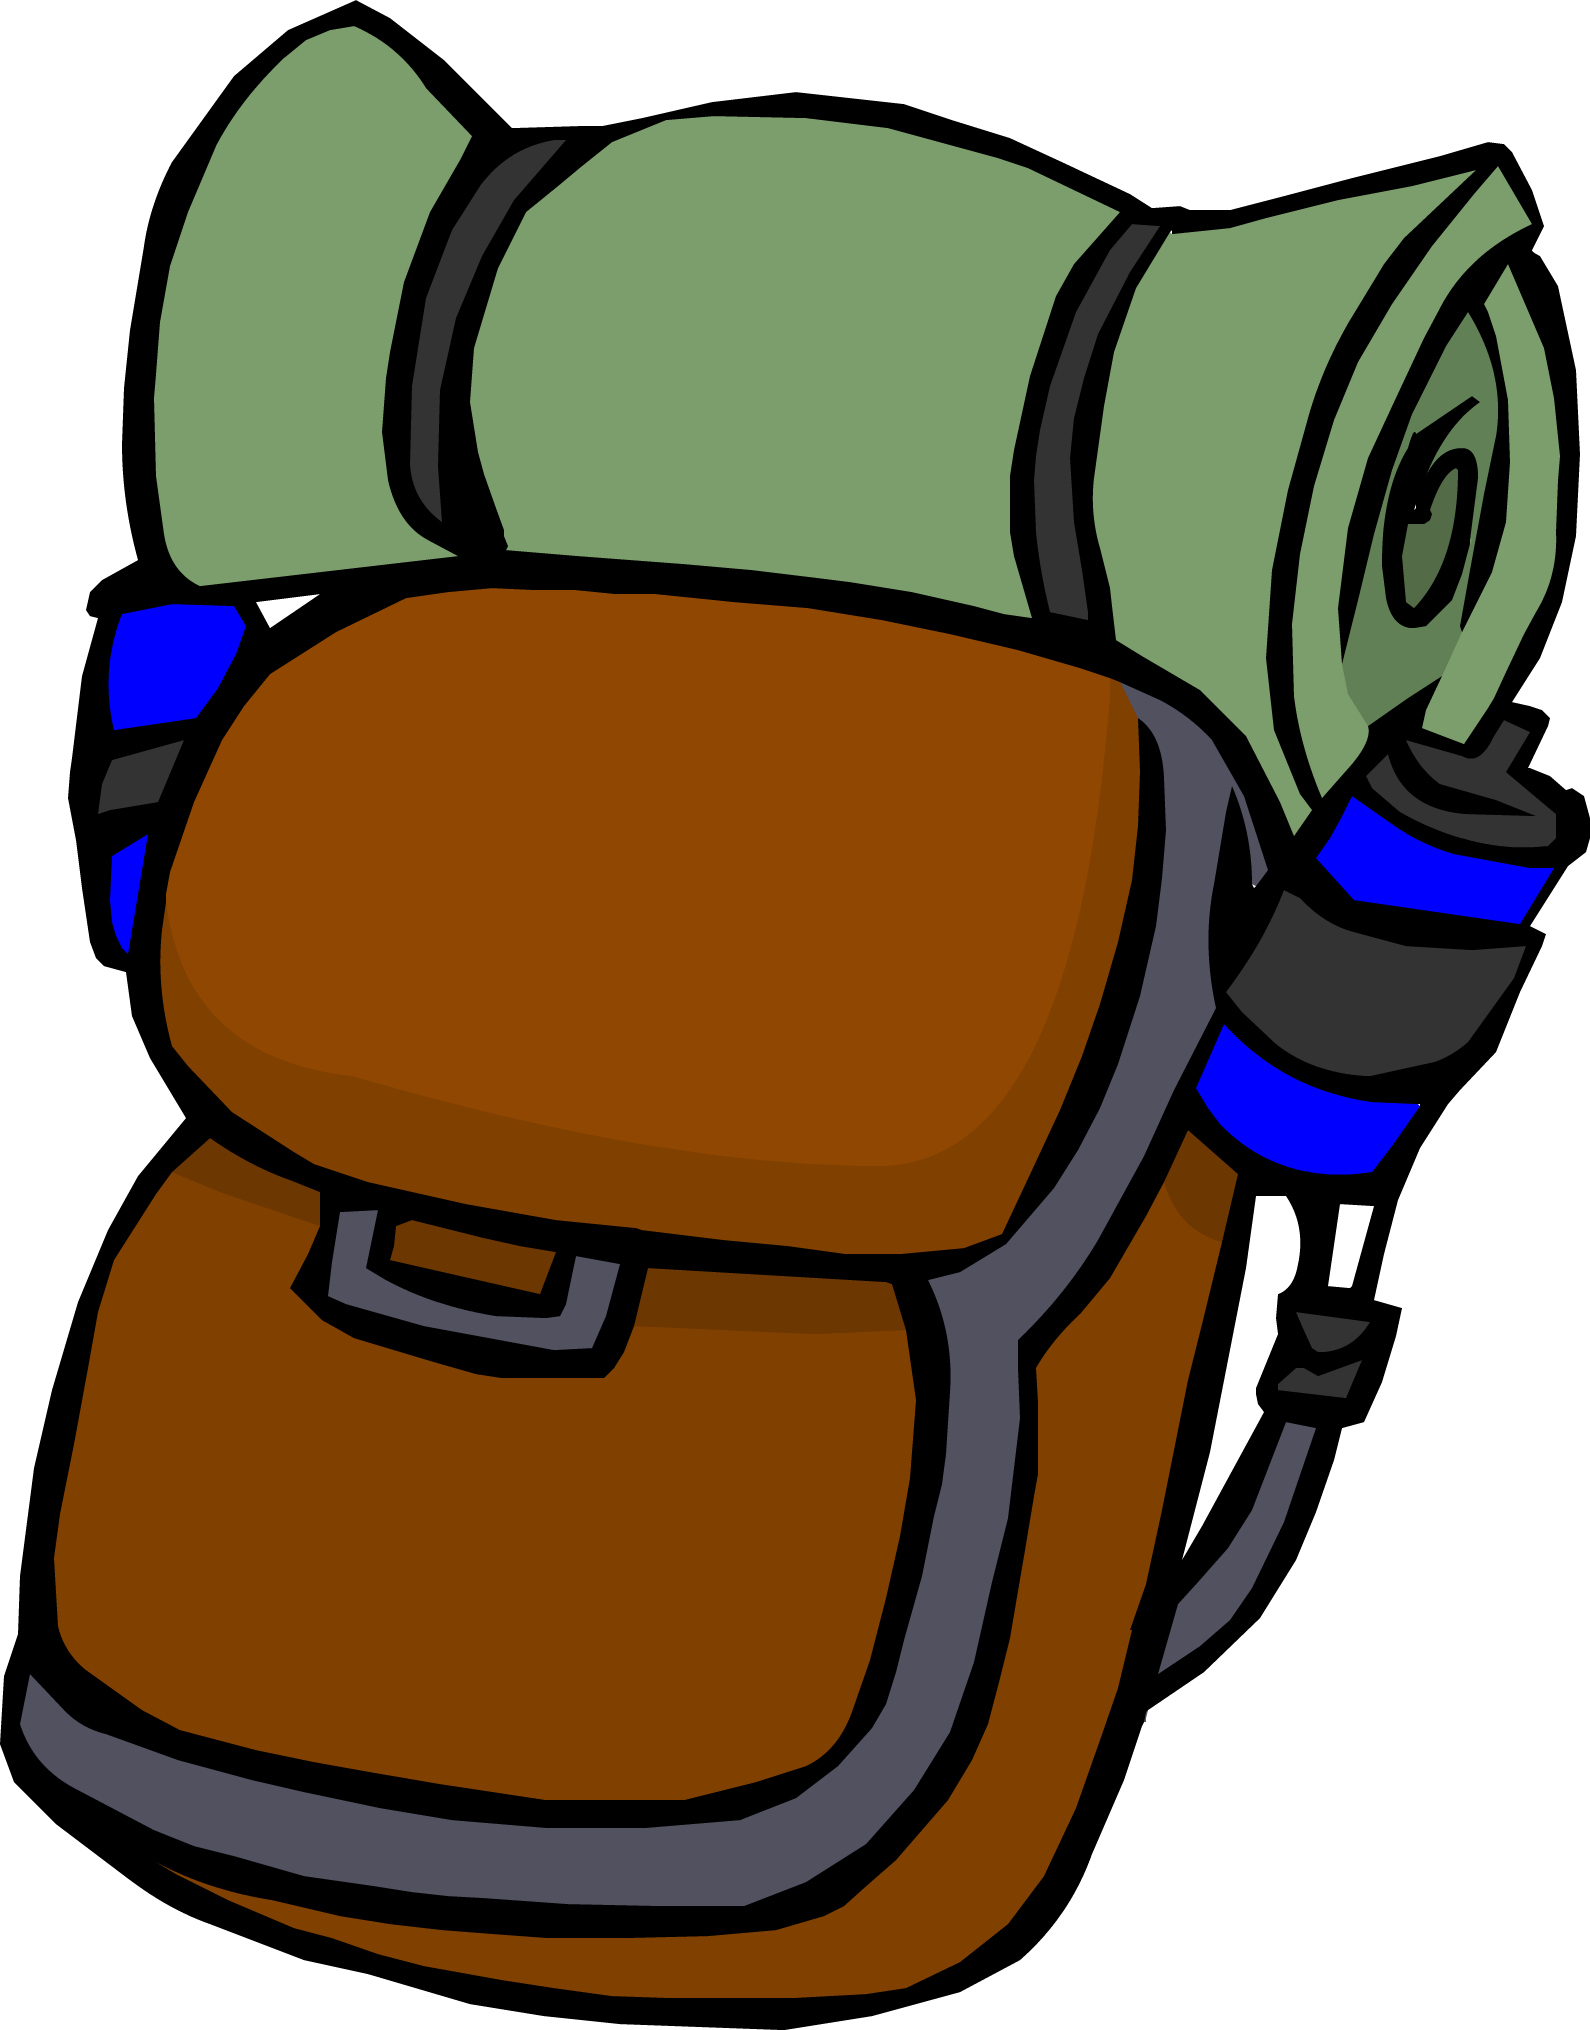 Camp Clipart Backpack - Club Penguin Backpack (1590x2030)